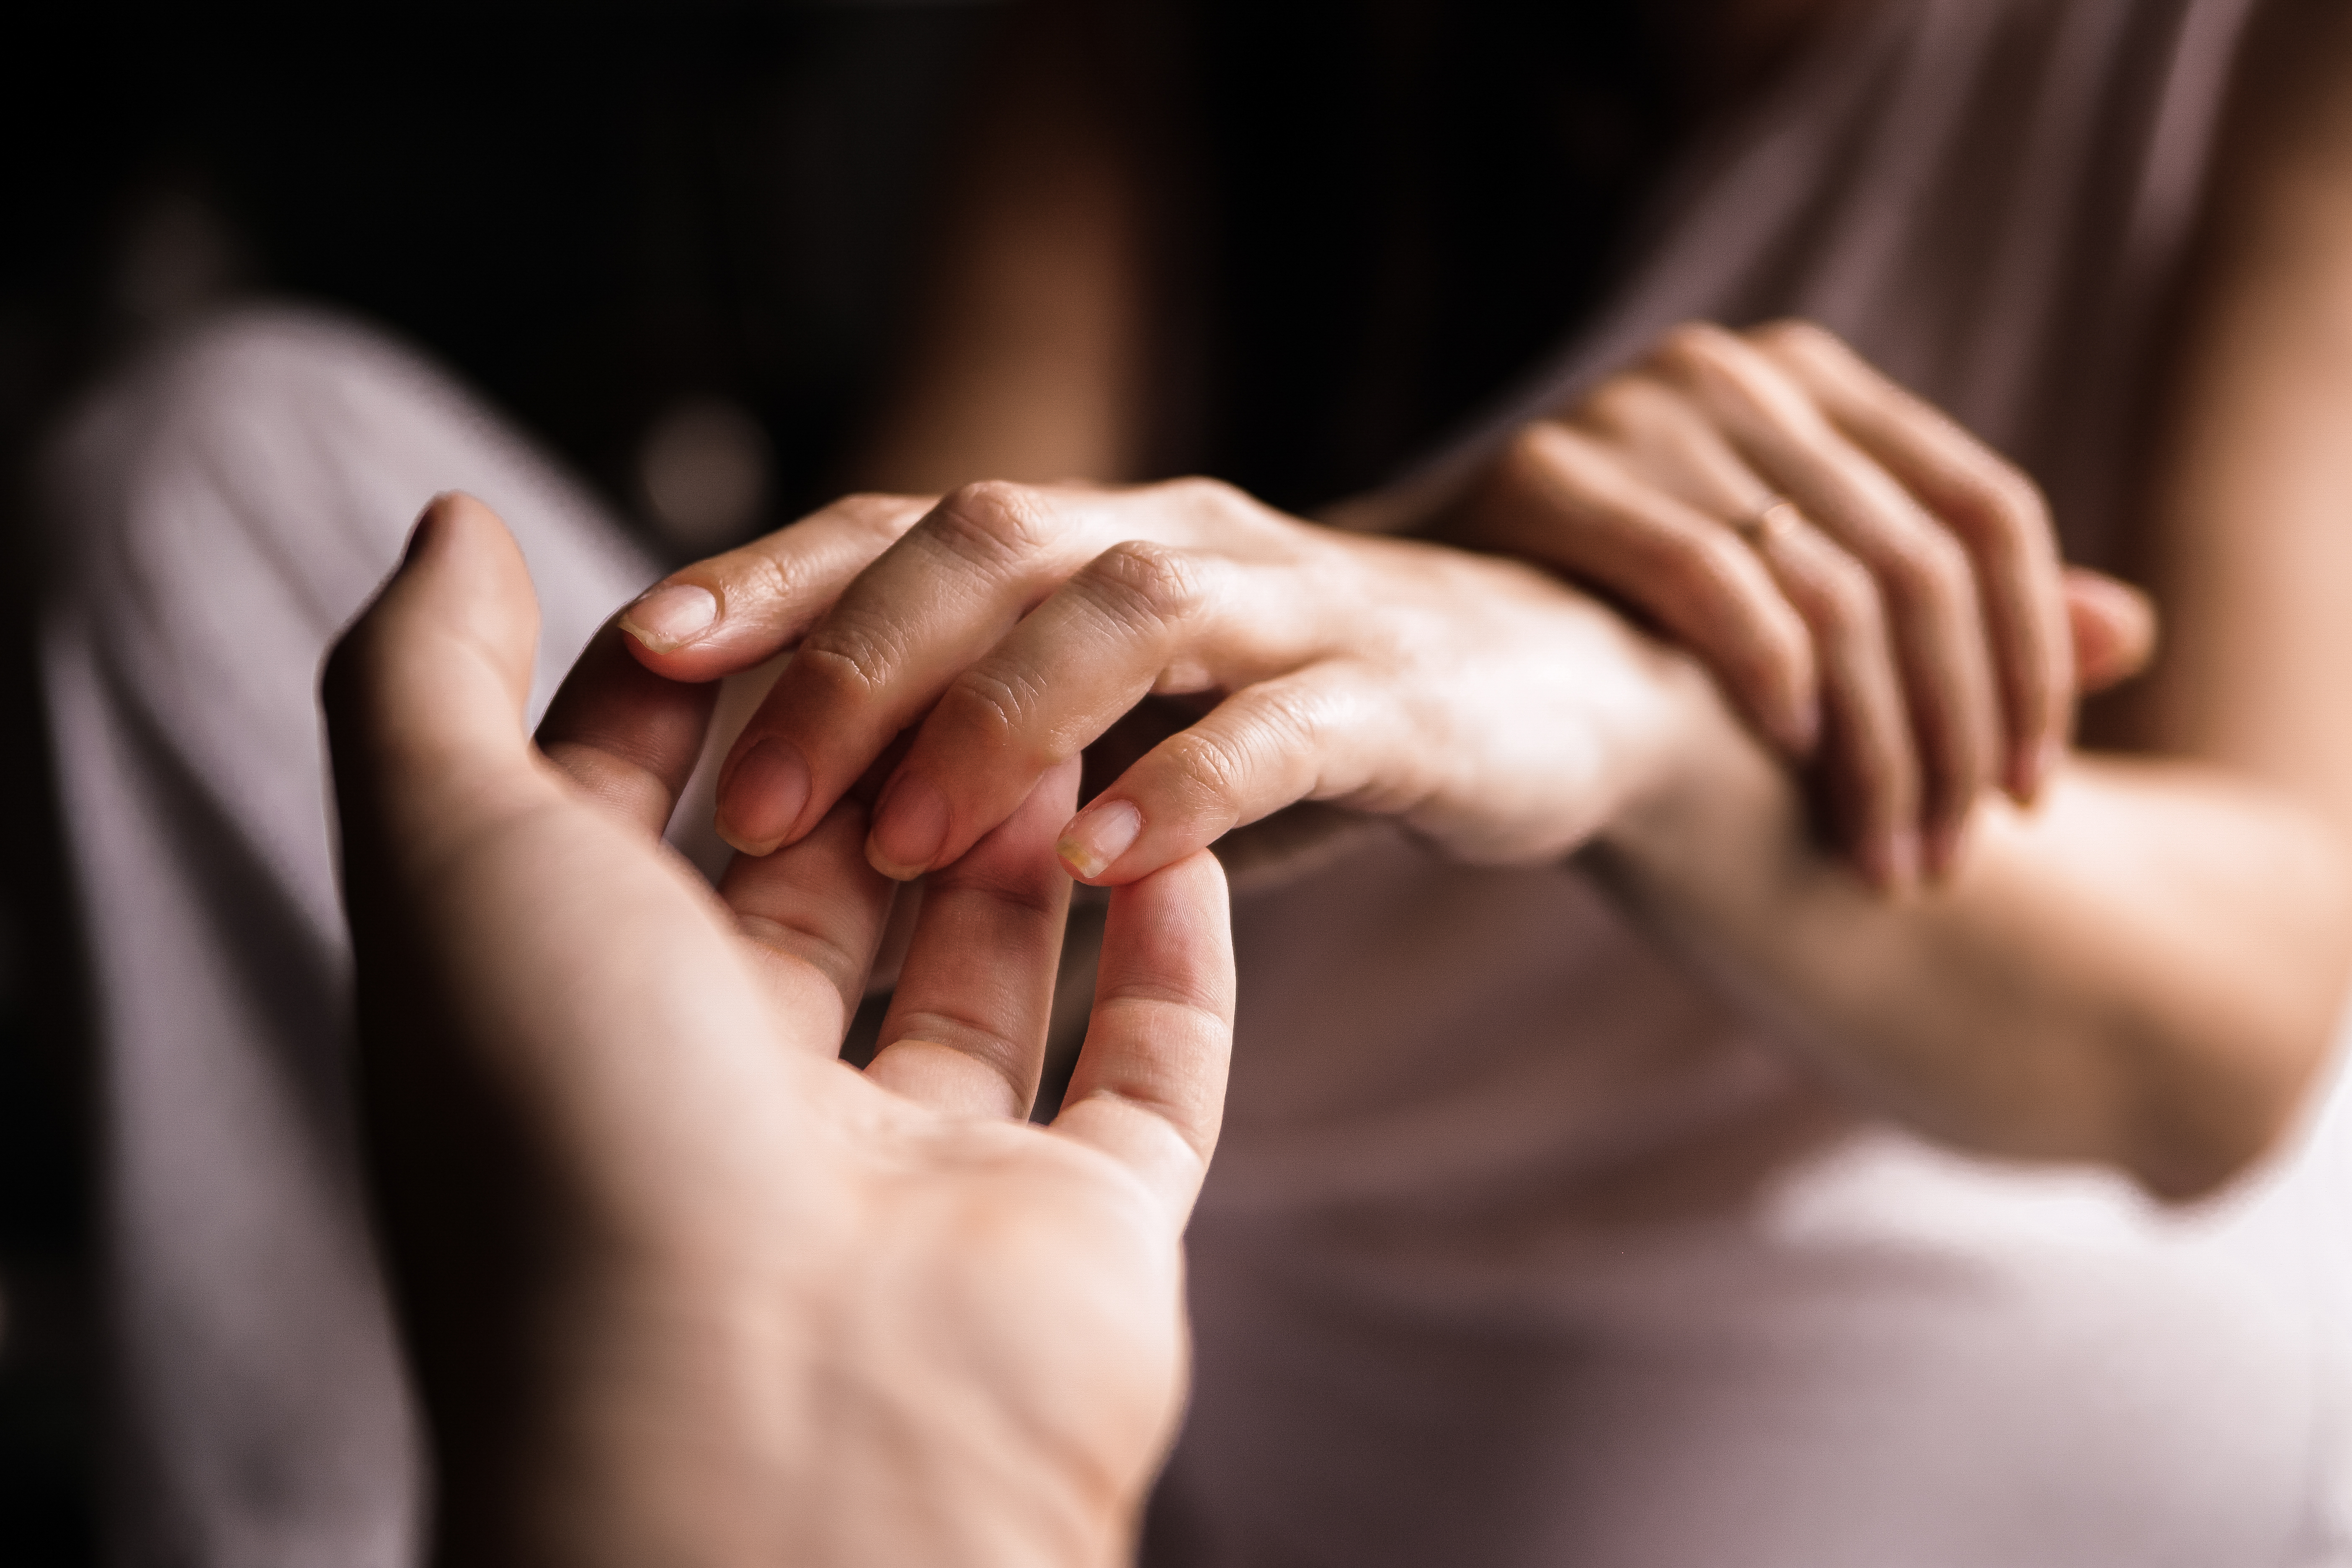 Woman and man holding hands | Source: Shutterstock